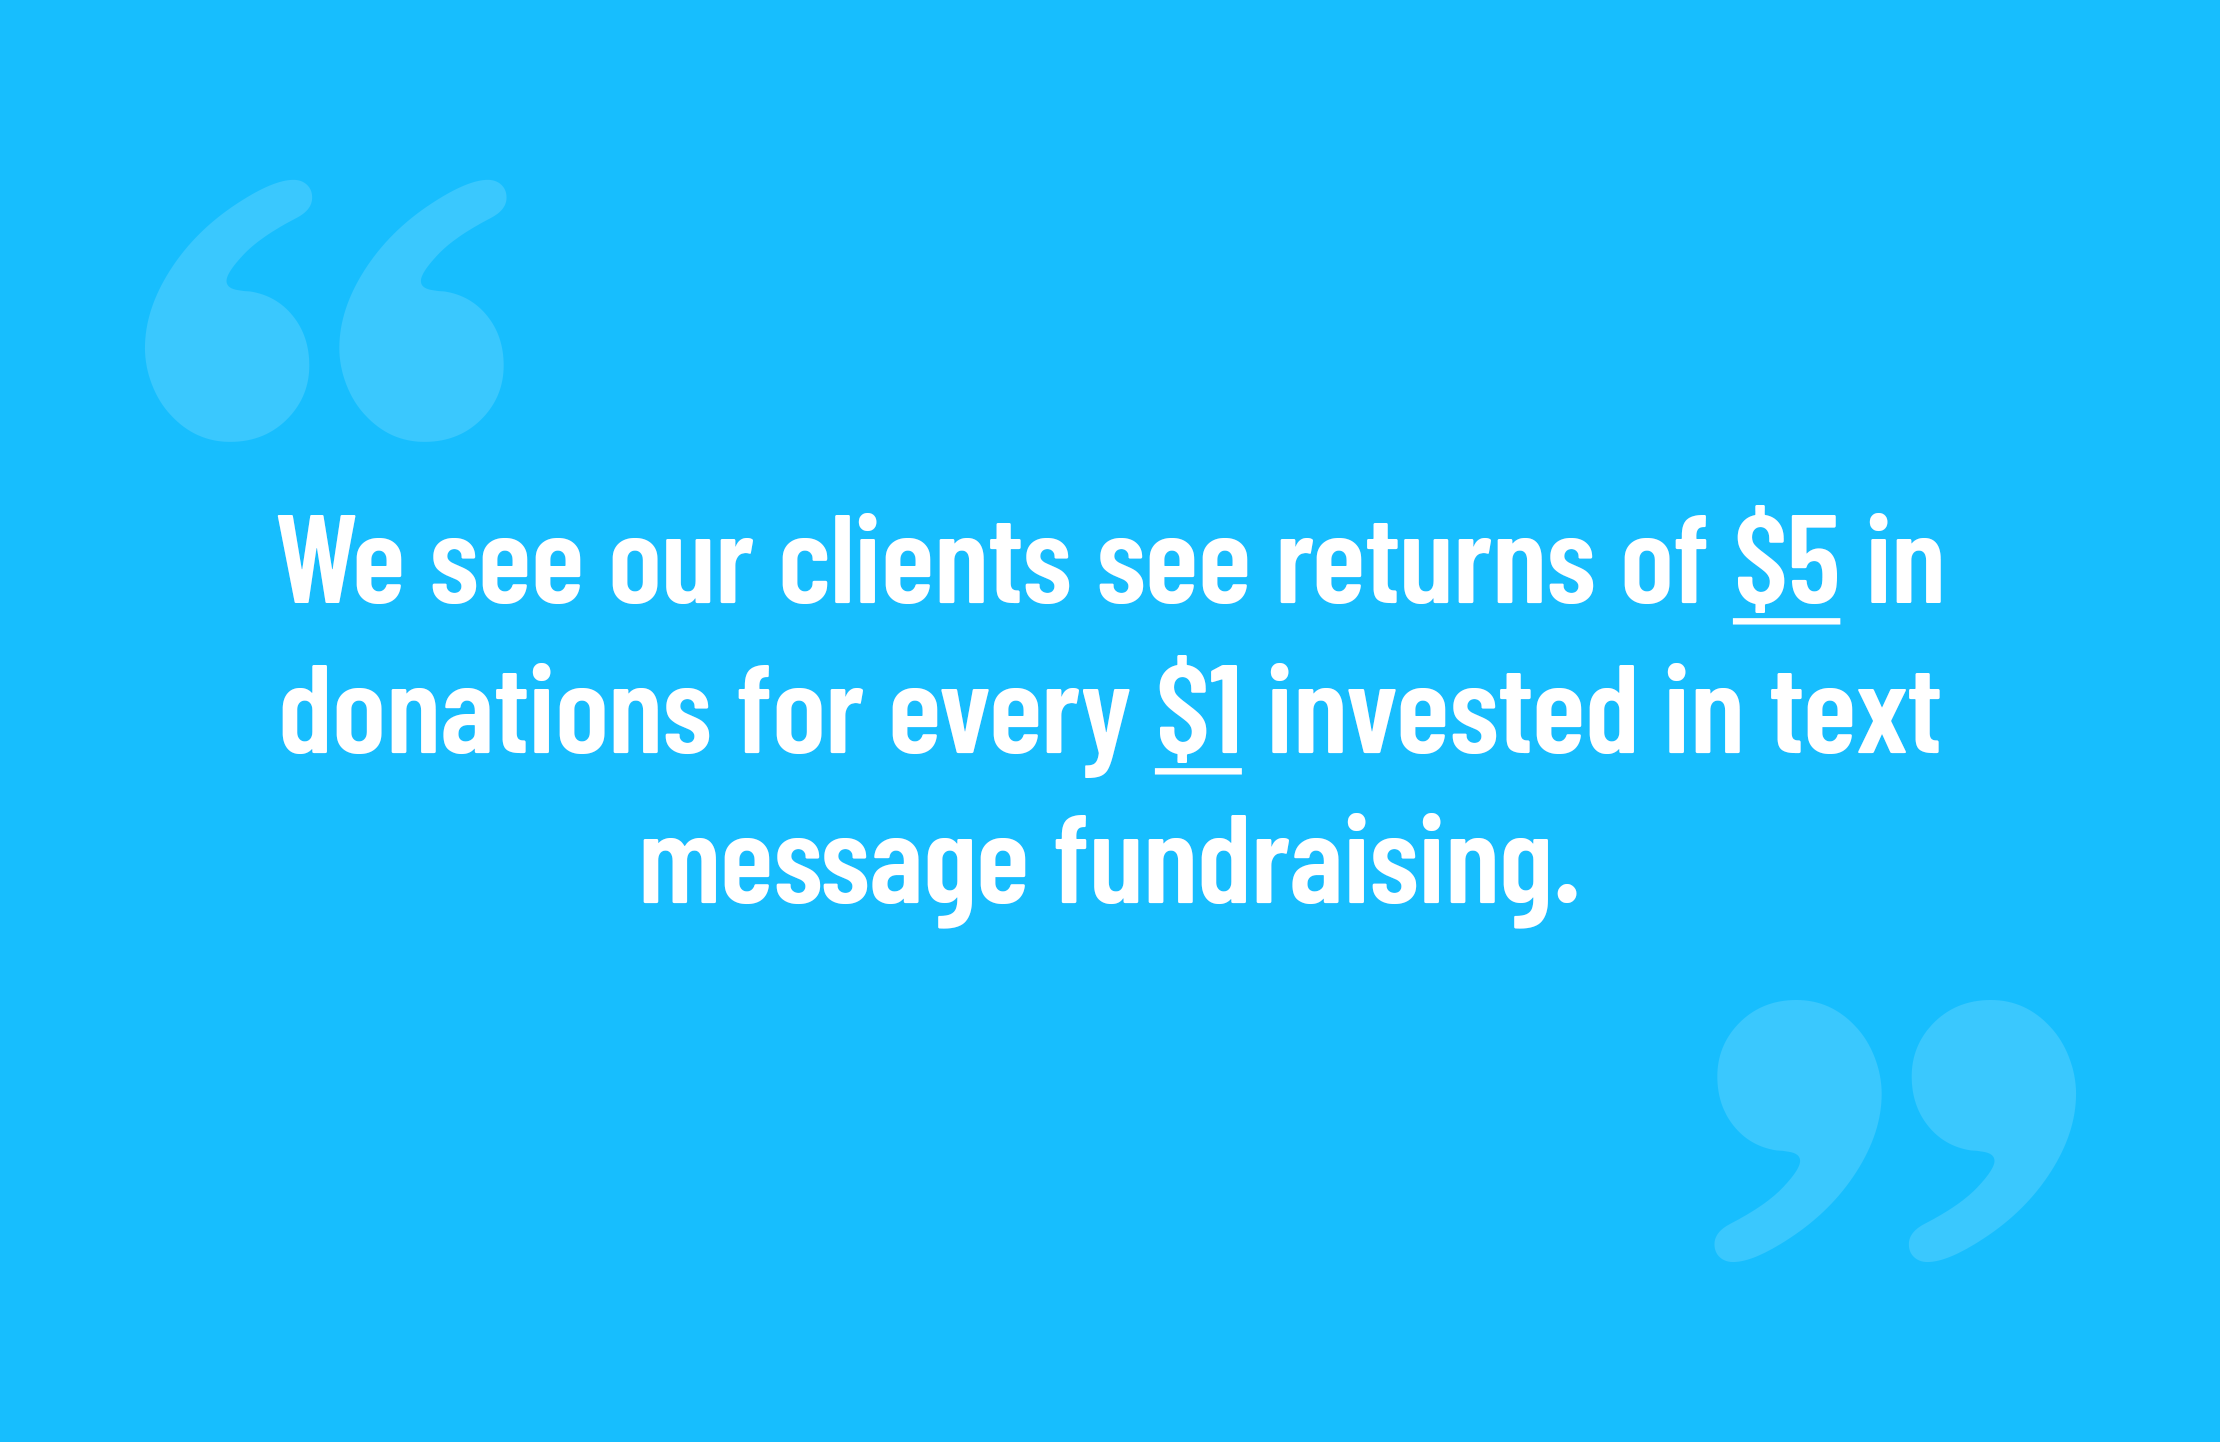 We see our clients see returns of $5 in donations for every $1 invested in text message fundraising